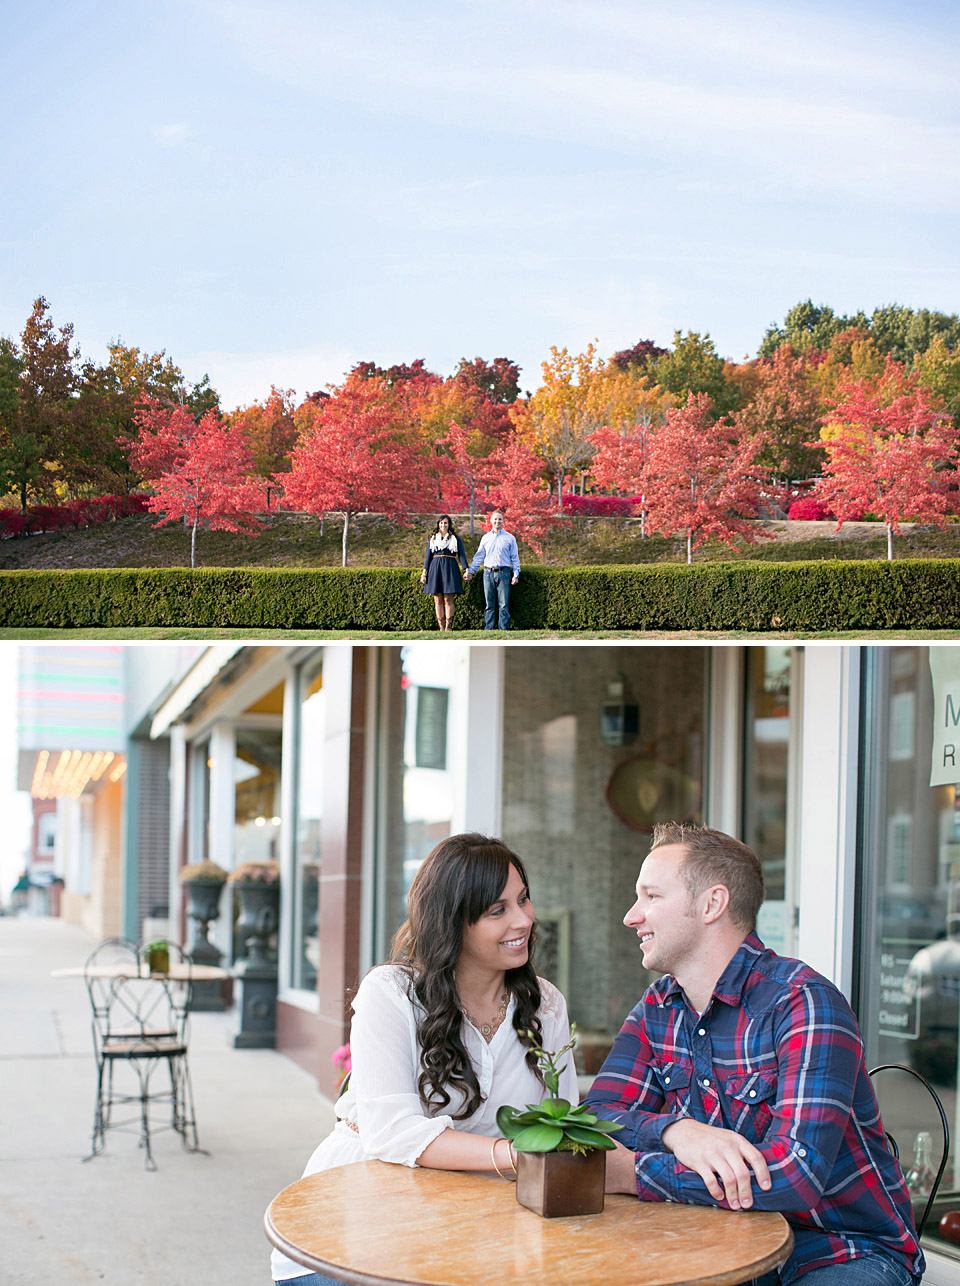 Beloved portraits, Independence square, Jana Marie Photography, Fall images, bright colors